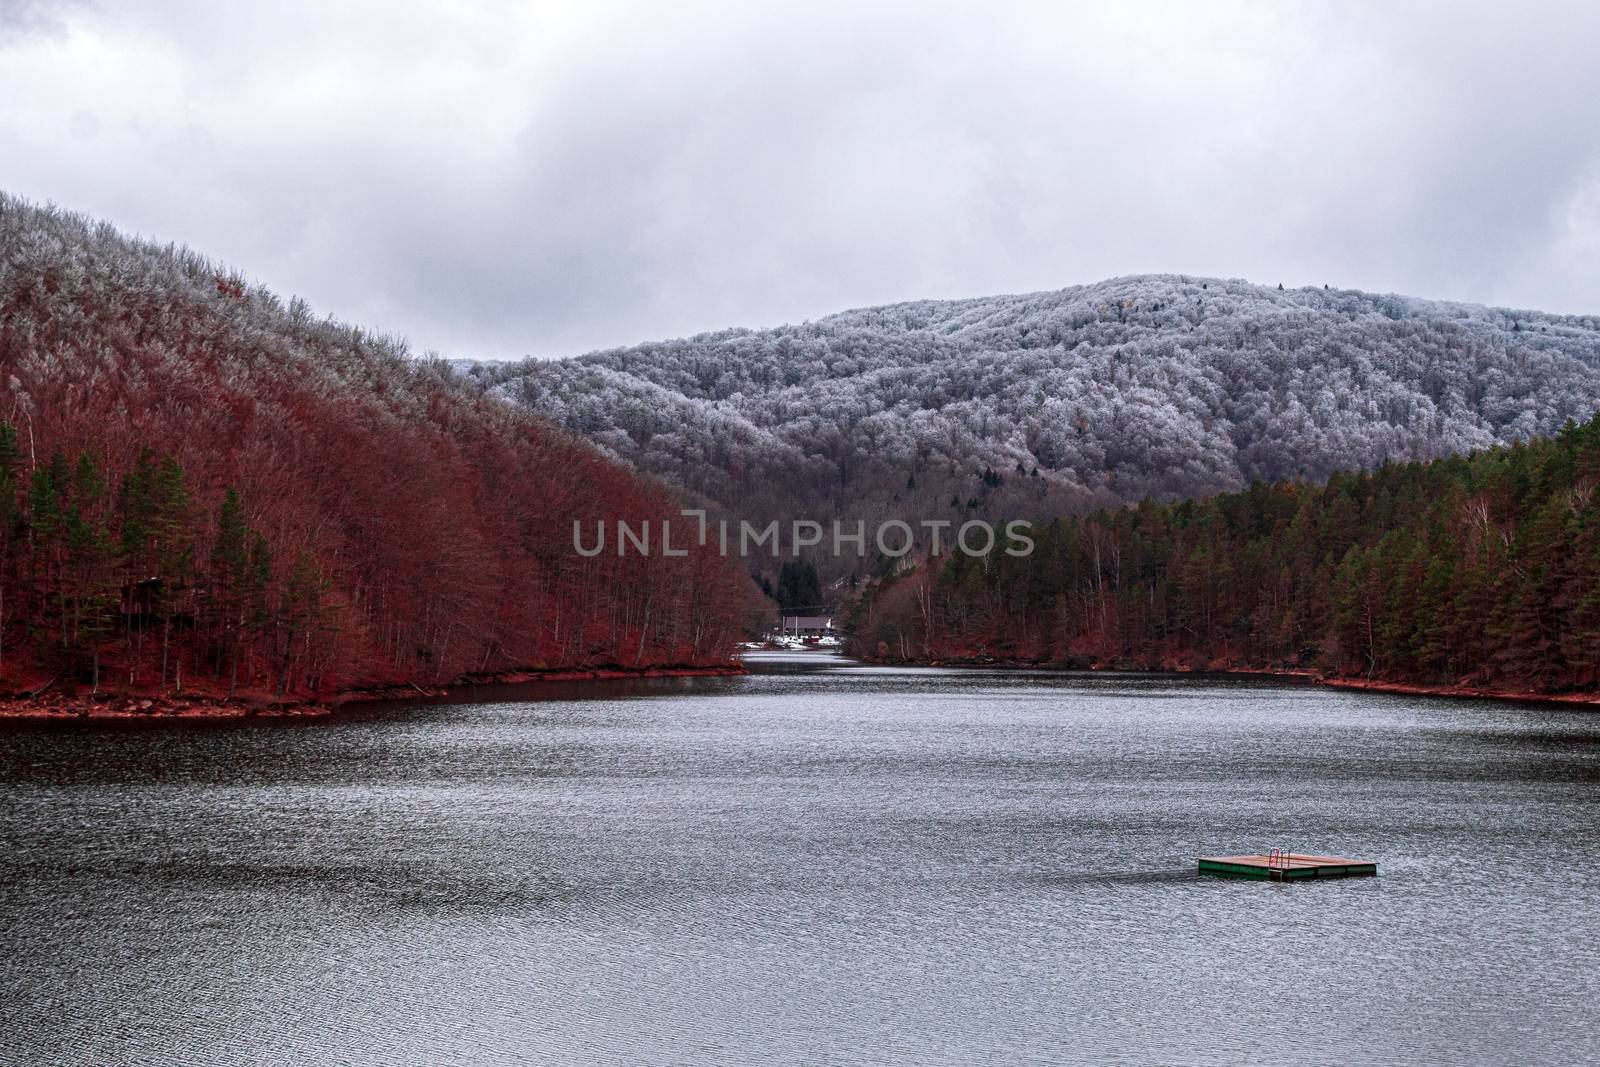 A frozen lake, surrounded by two forests of different colors, in a city in Romania called Valiug by bybyphotography